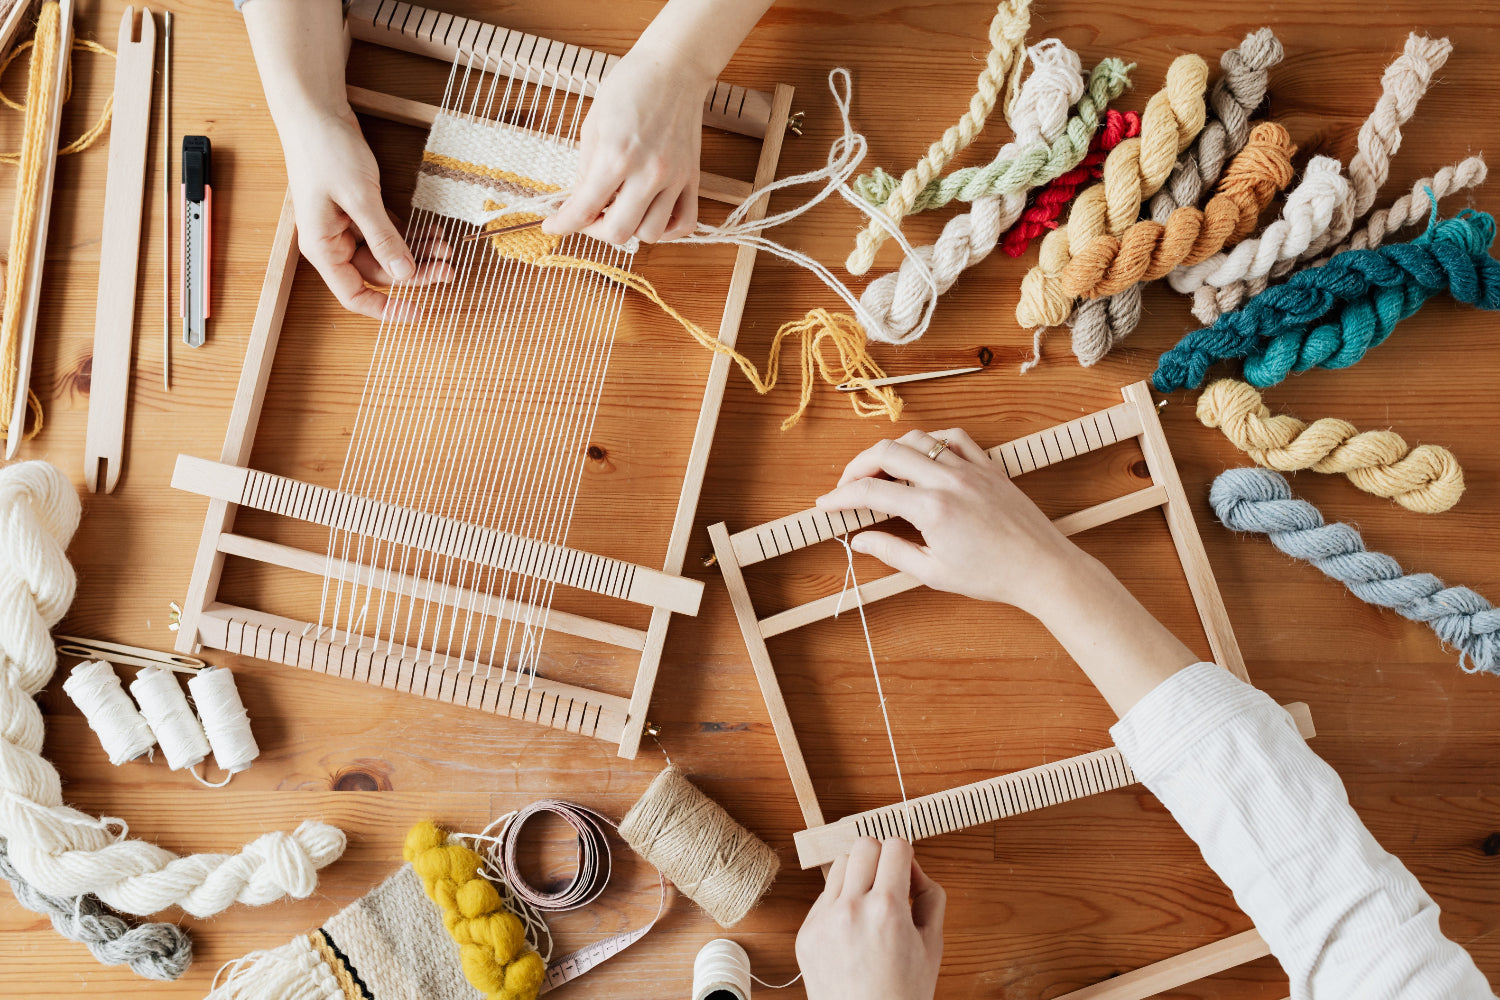 People make textile crafts on wooden looms